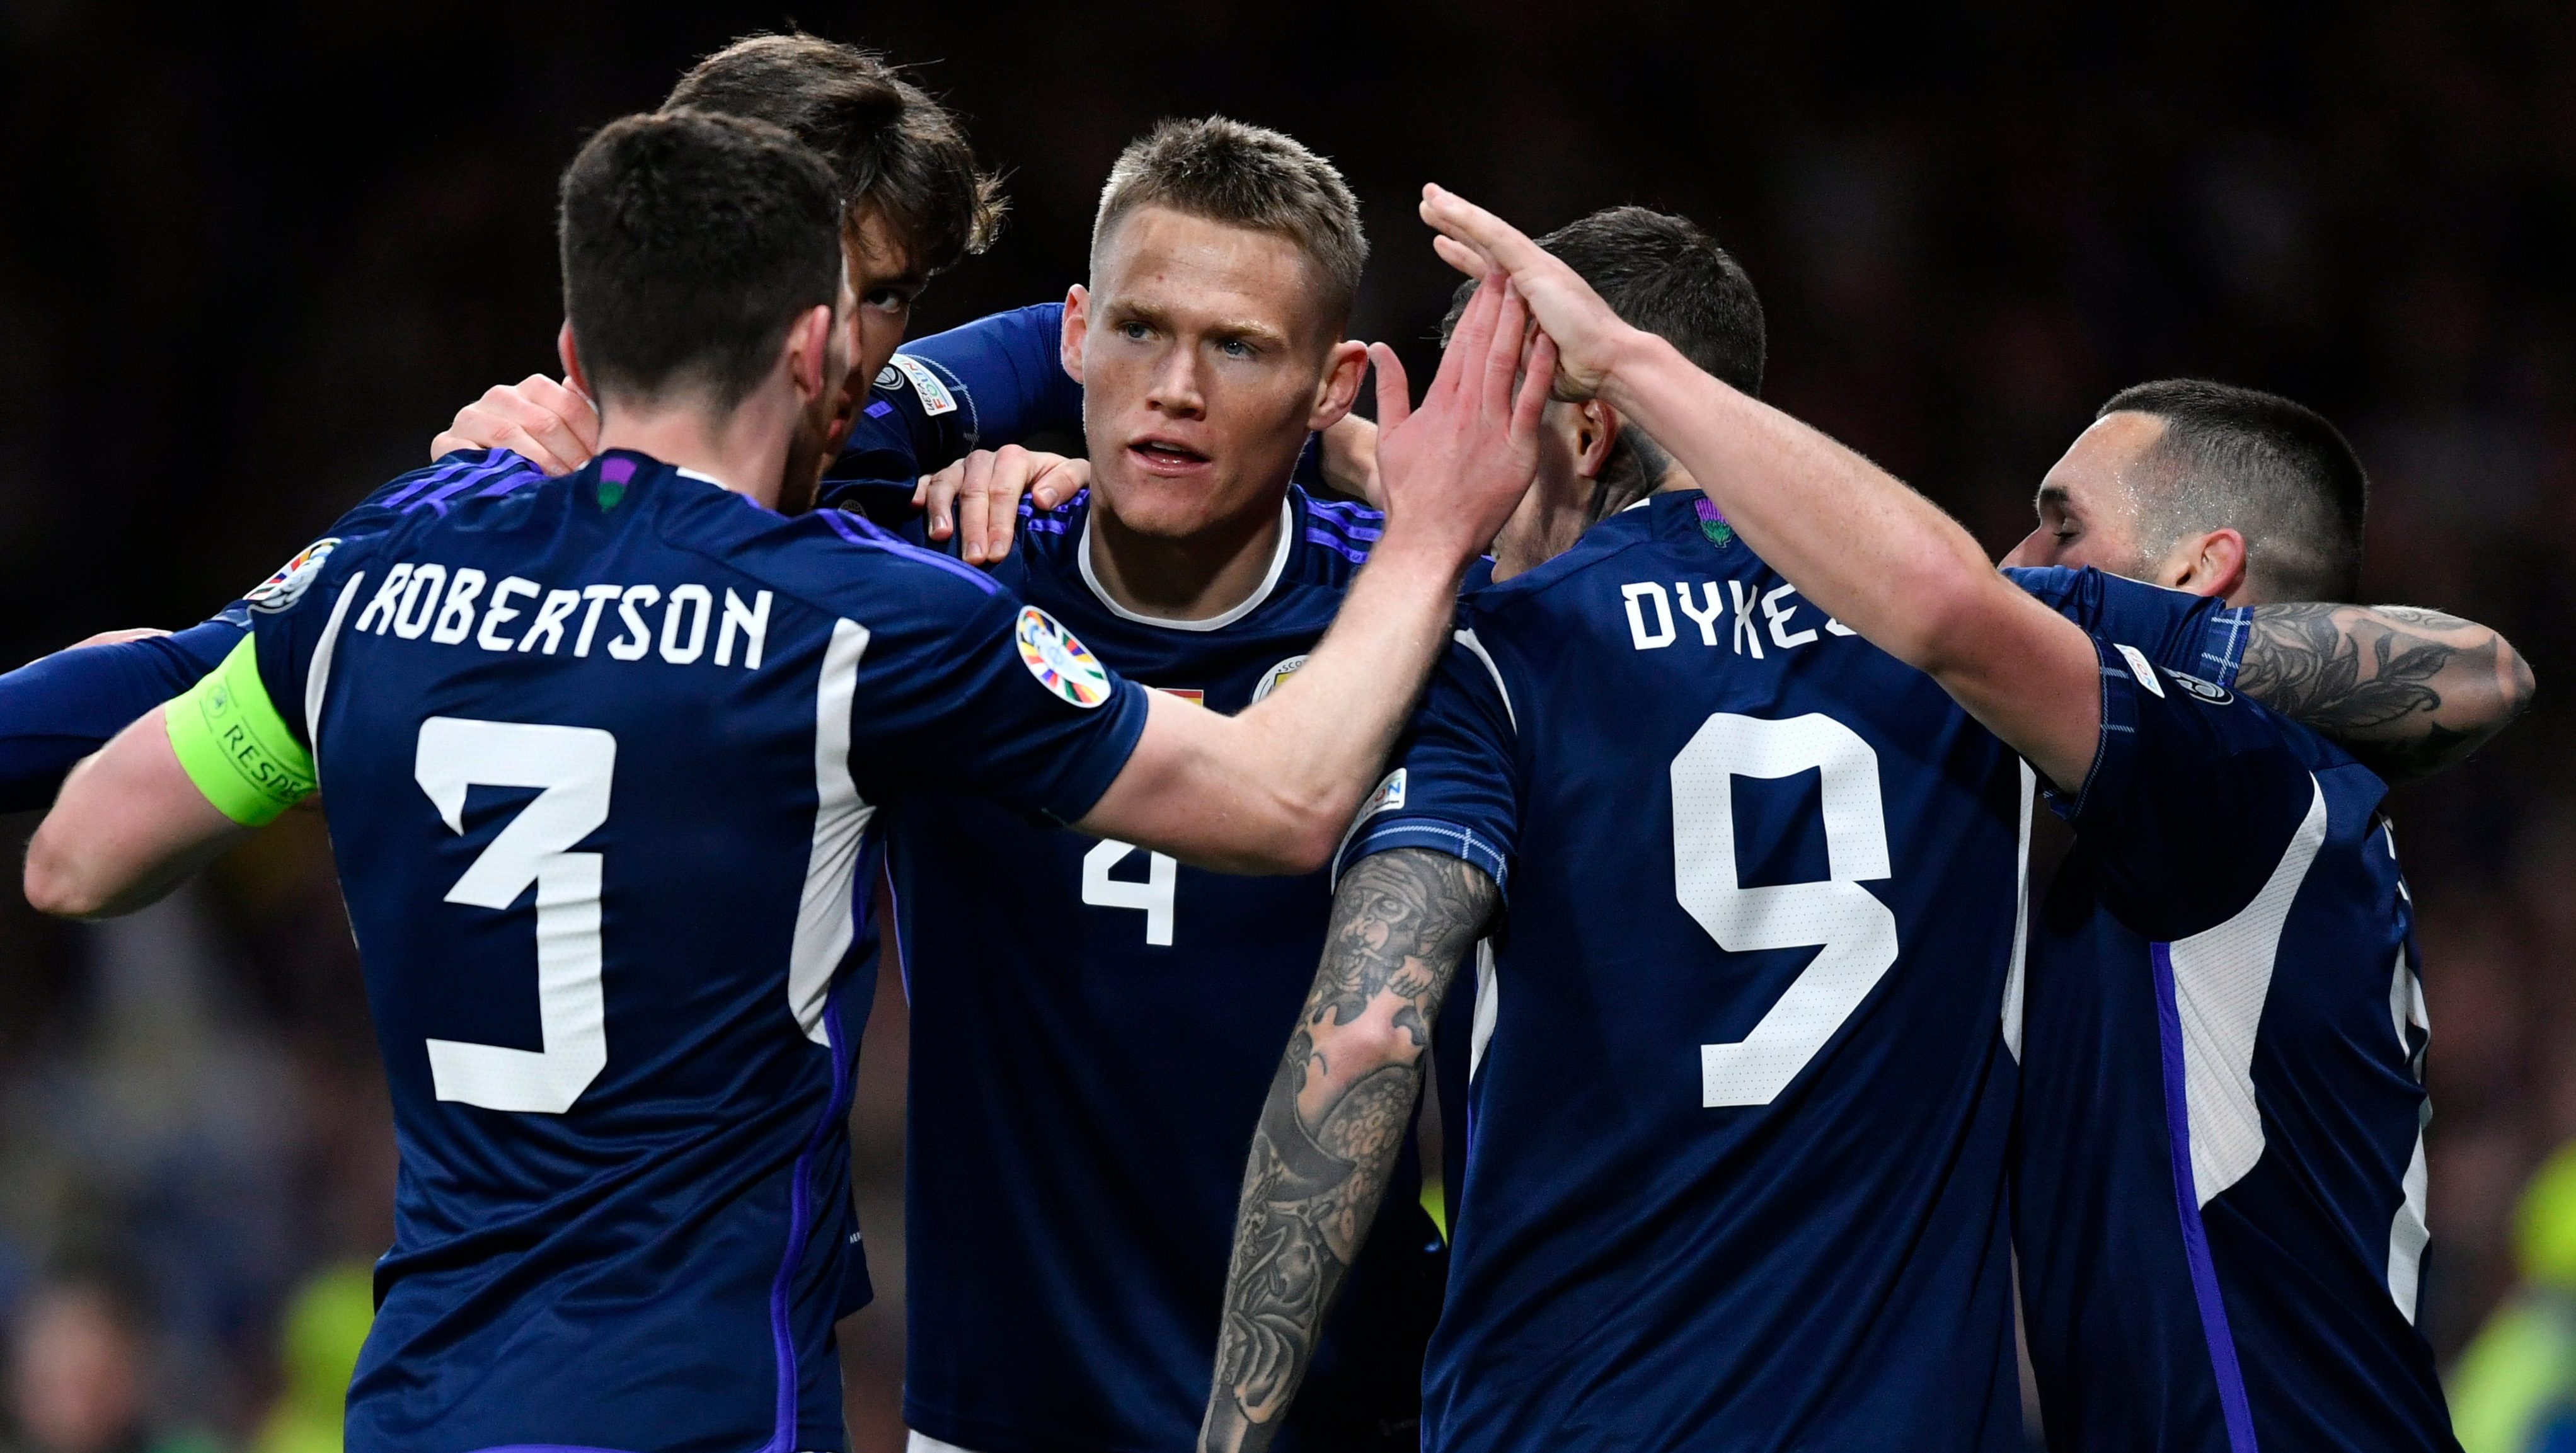 GLASGOW, SCOTLAND - MARCH 28: Scotland's Scott McTominay celebrates as he makes it 1-0 during a UEFA Euro 2024 Qualifier between Scotland and Spain at Hampden Park, on March 28, 2023, in Glasgow, Scotland. (Photo by Ross MacDonald / SNS Group)